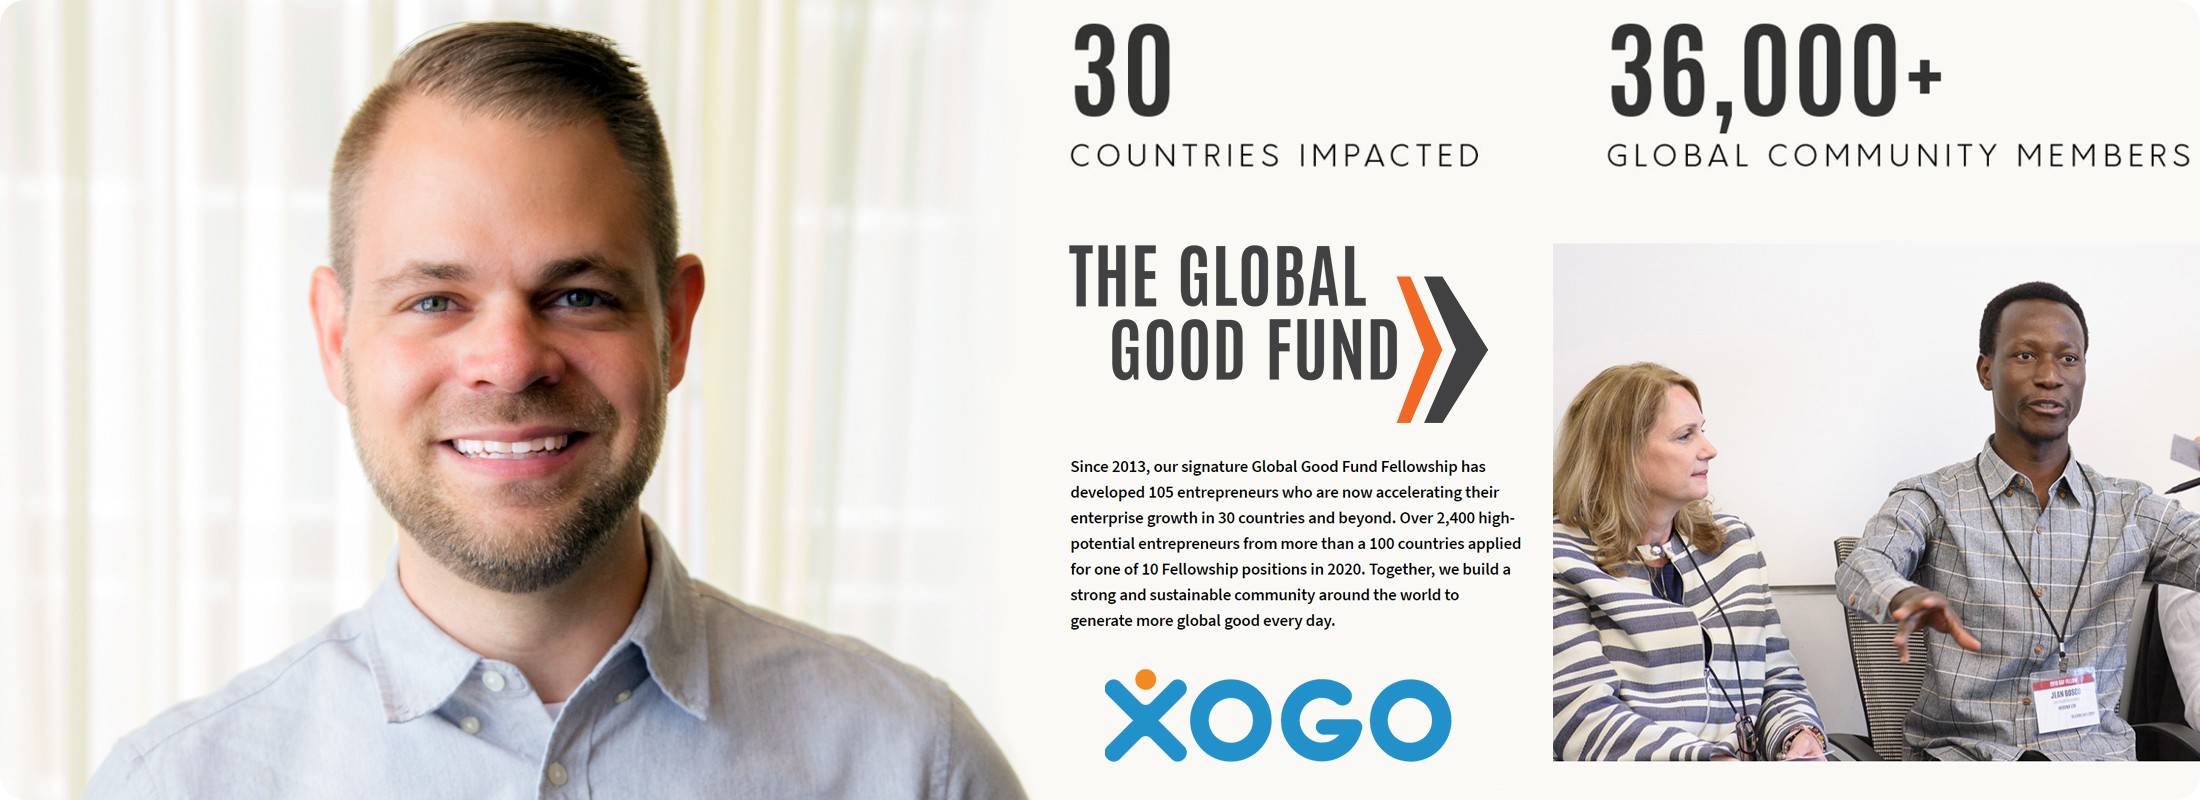 Xogo is a Part of the Global Good Fund